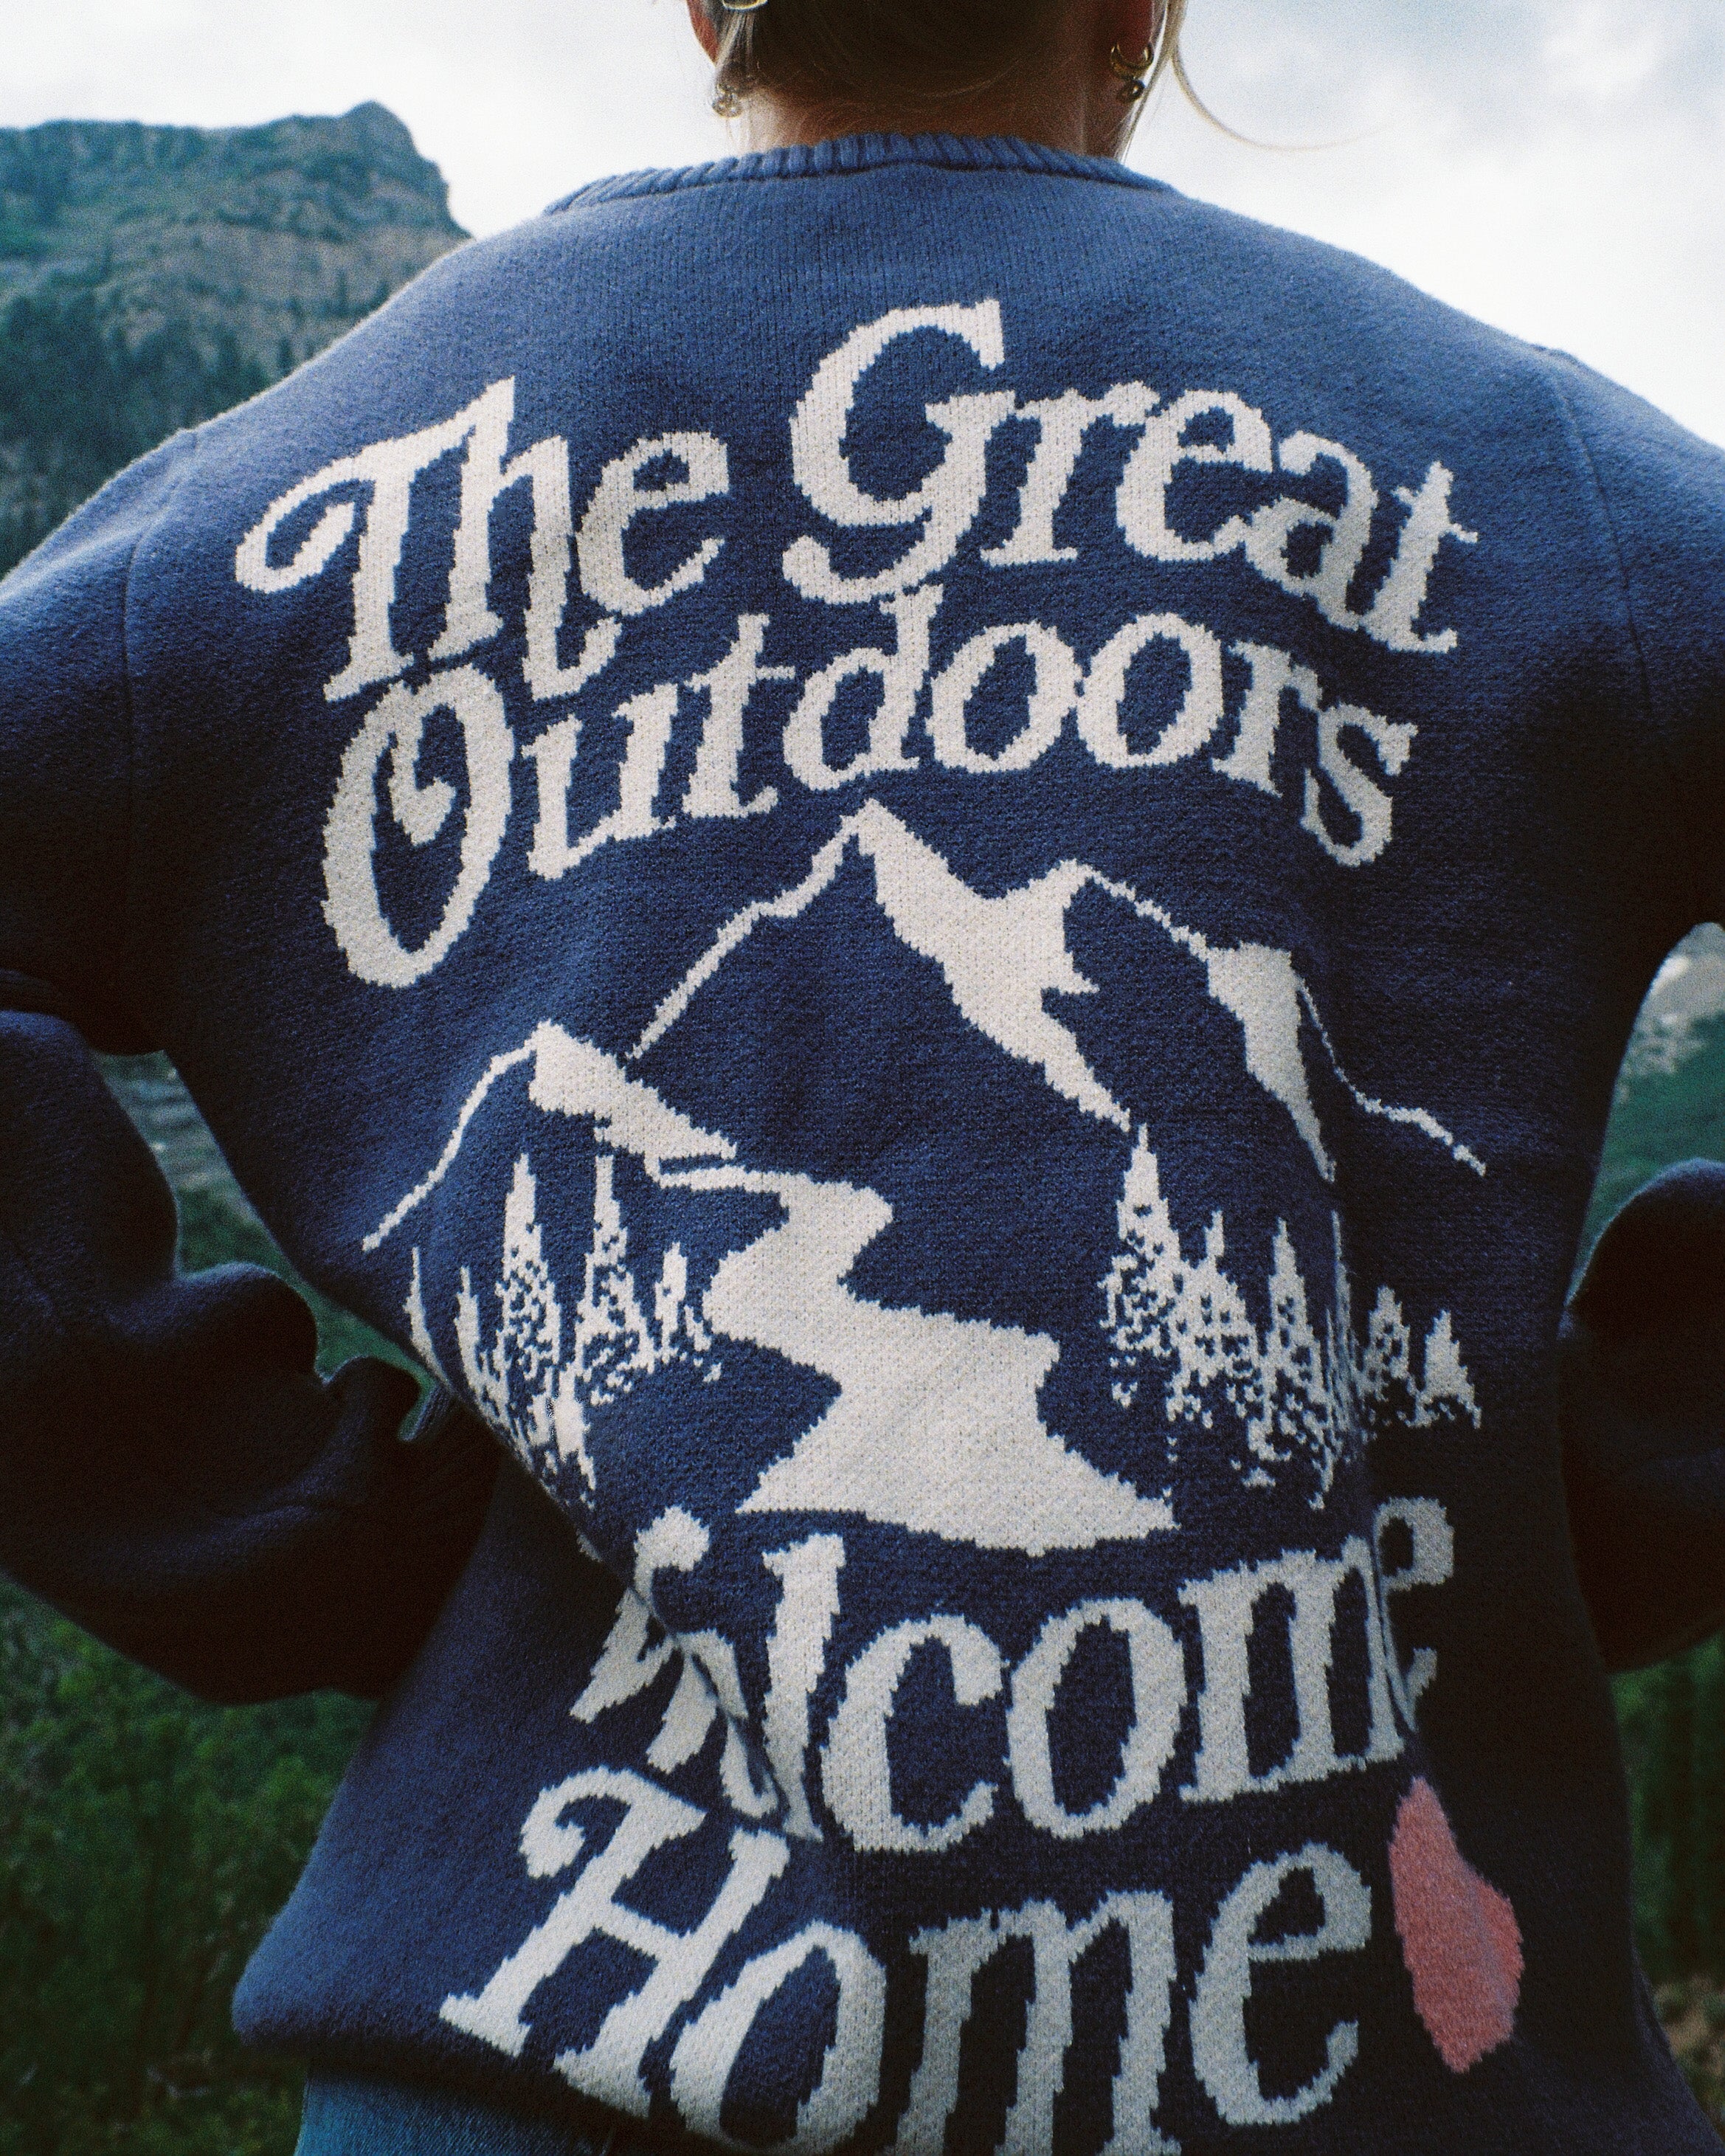 "The Great Outdoors" Knit Sweater in Blue